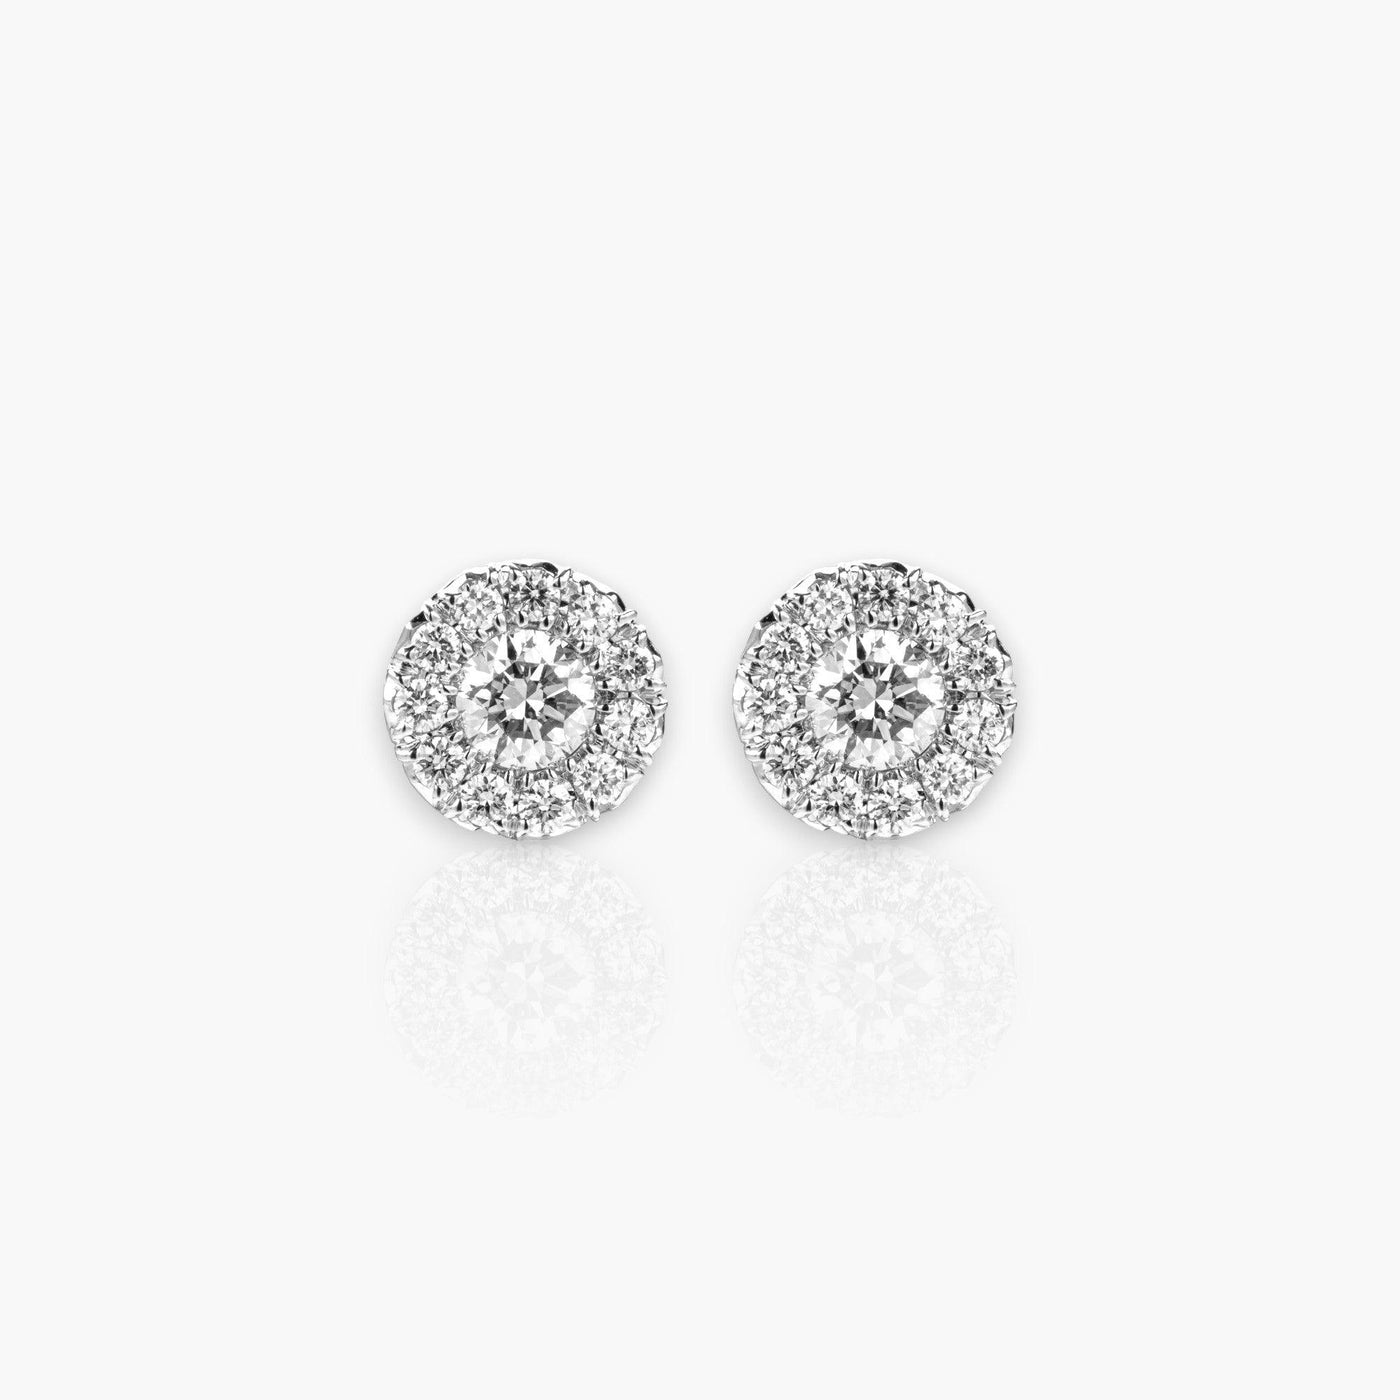 Earrings, White Gold and 24 Diamonds (Round) - Moregola Fine Jewelry